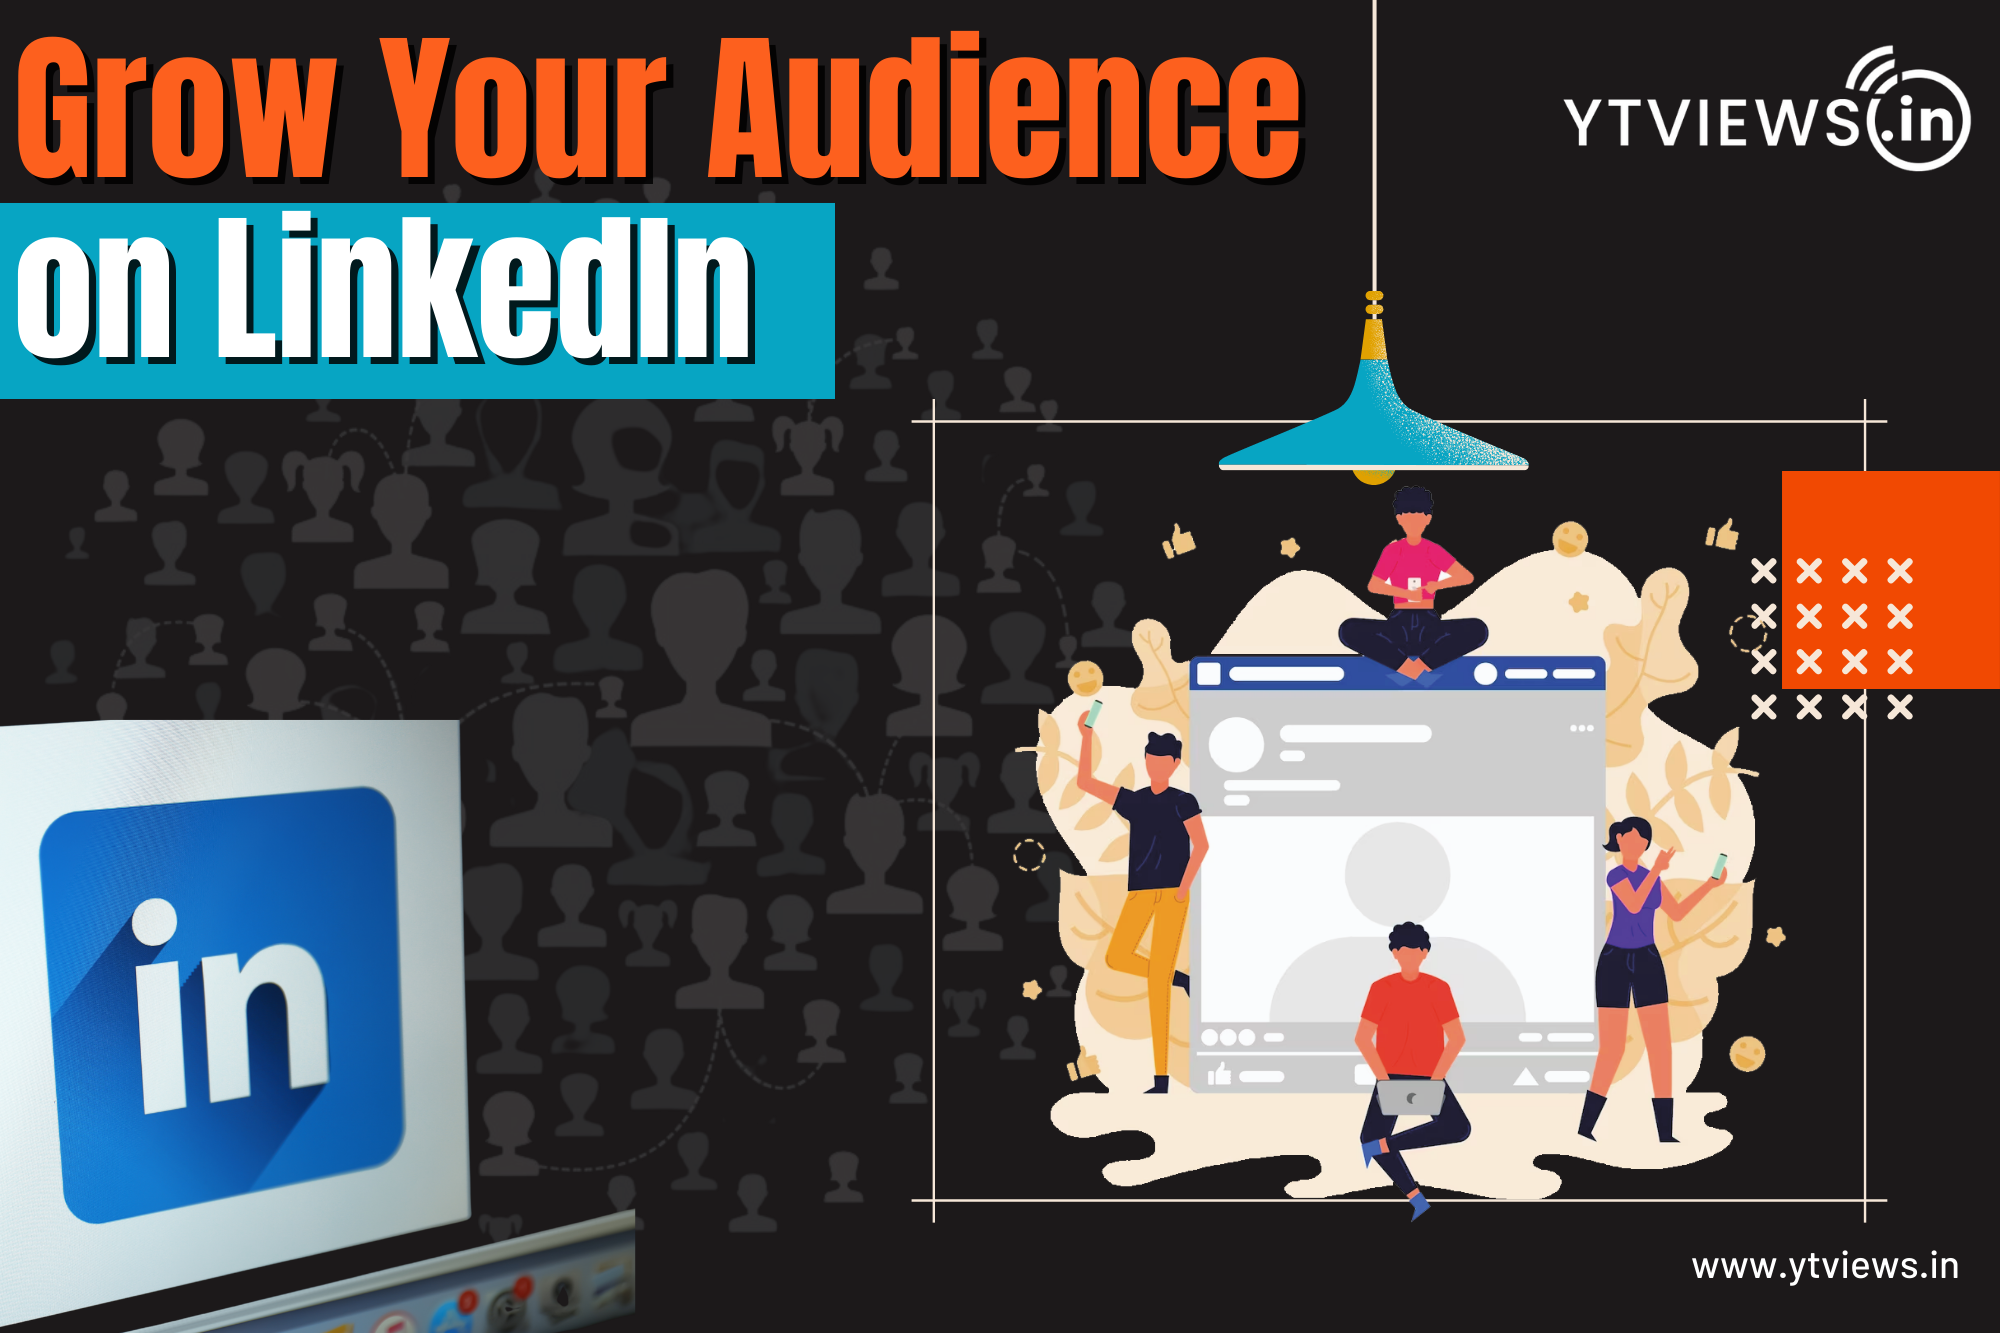 The Role of Content Marketing on LinkedIn: How to Engage Your Audience and Grow Your Following